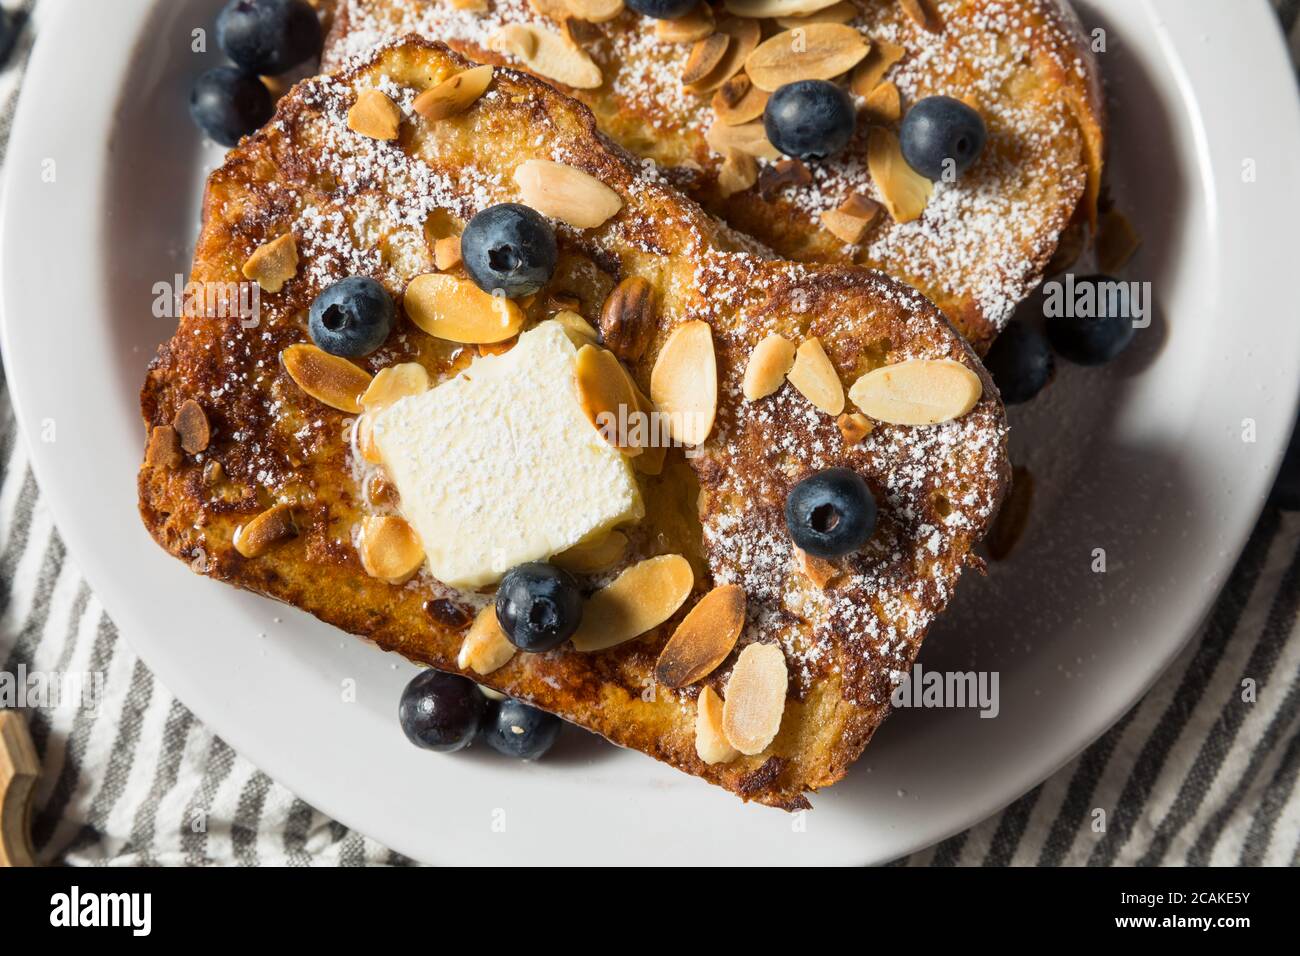 Homemade Brioche French Toast with Blueberries and Almonds Stock Photo